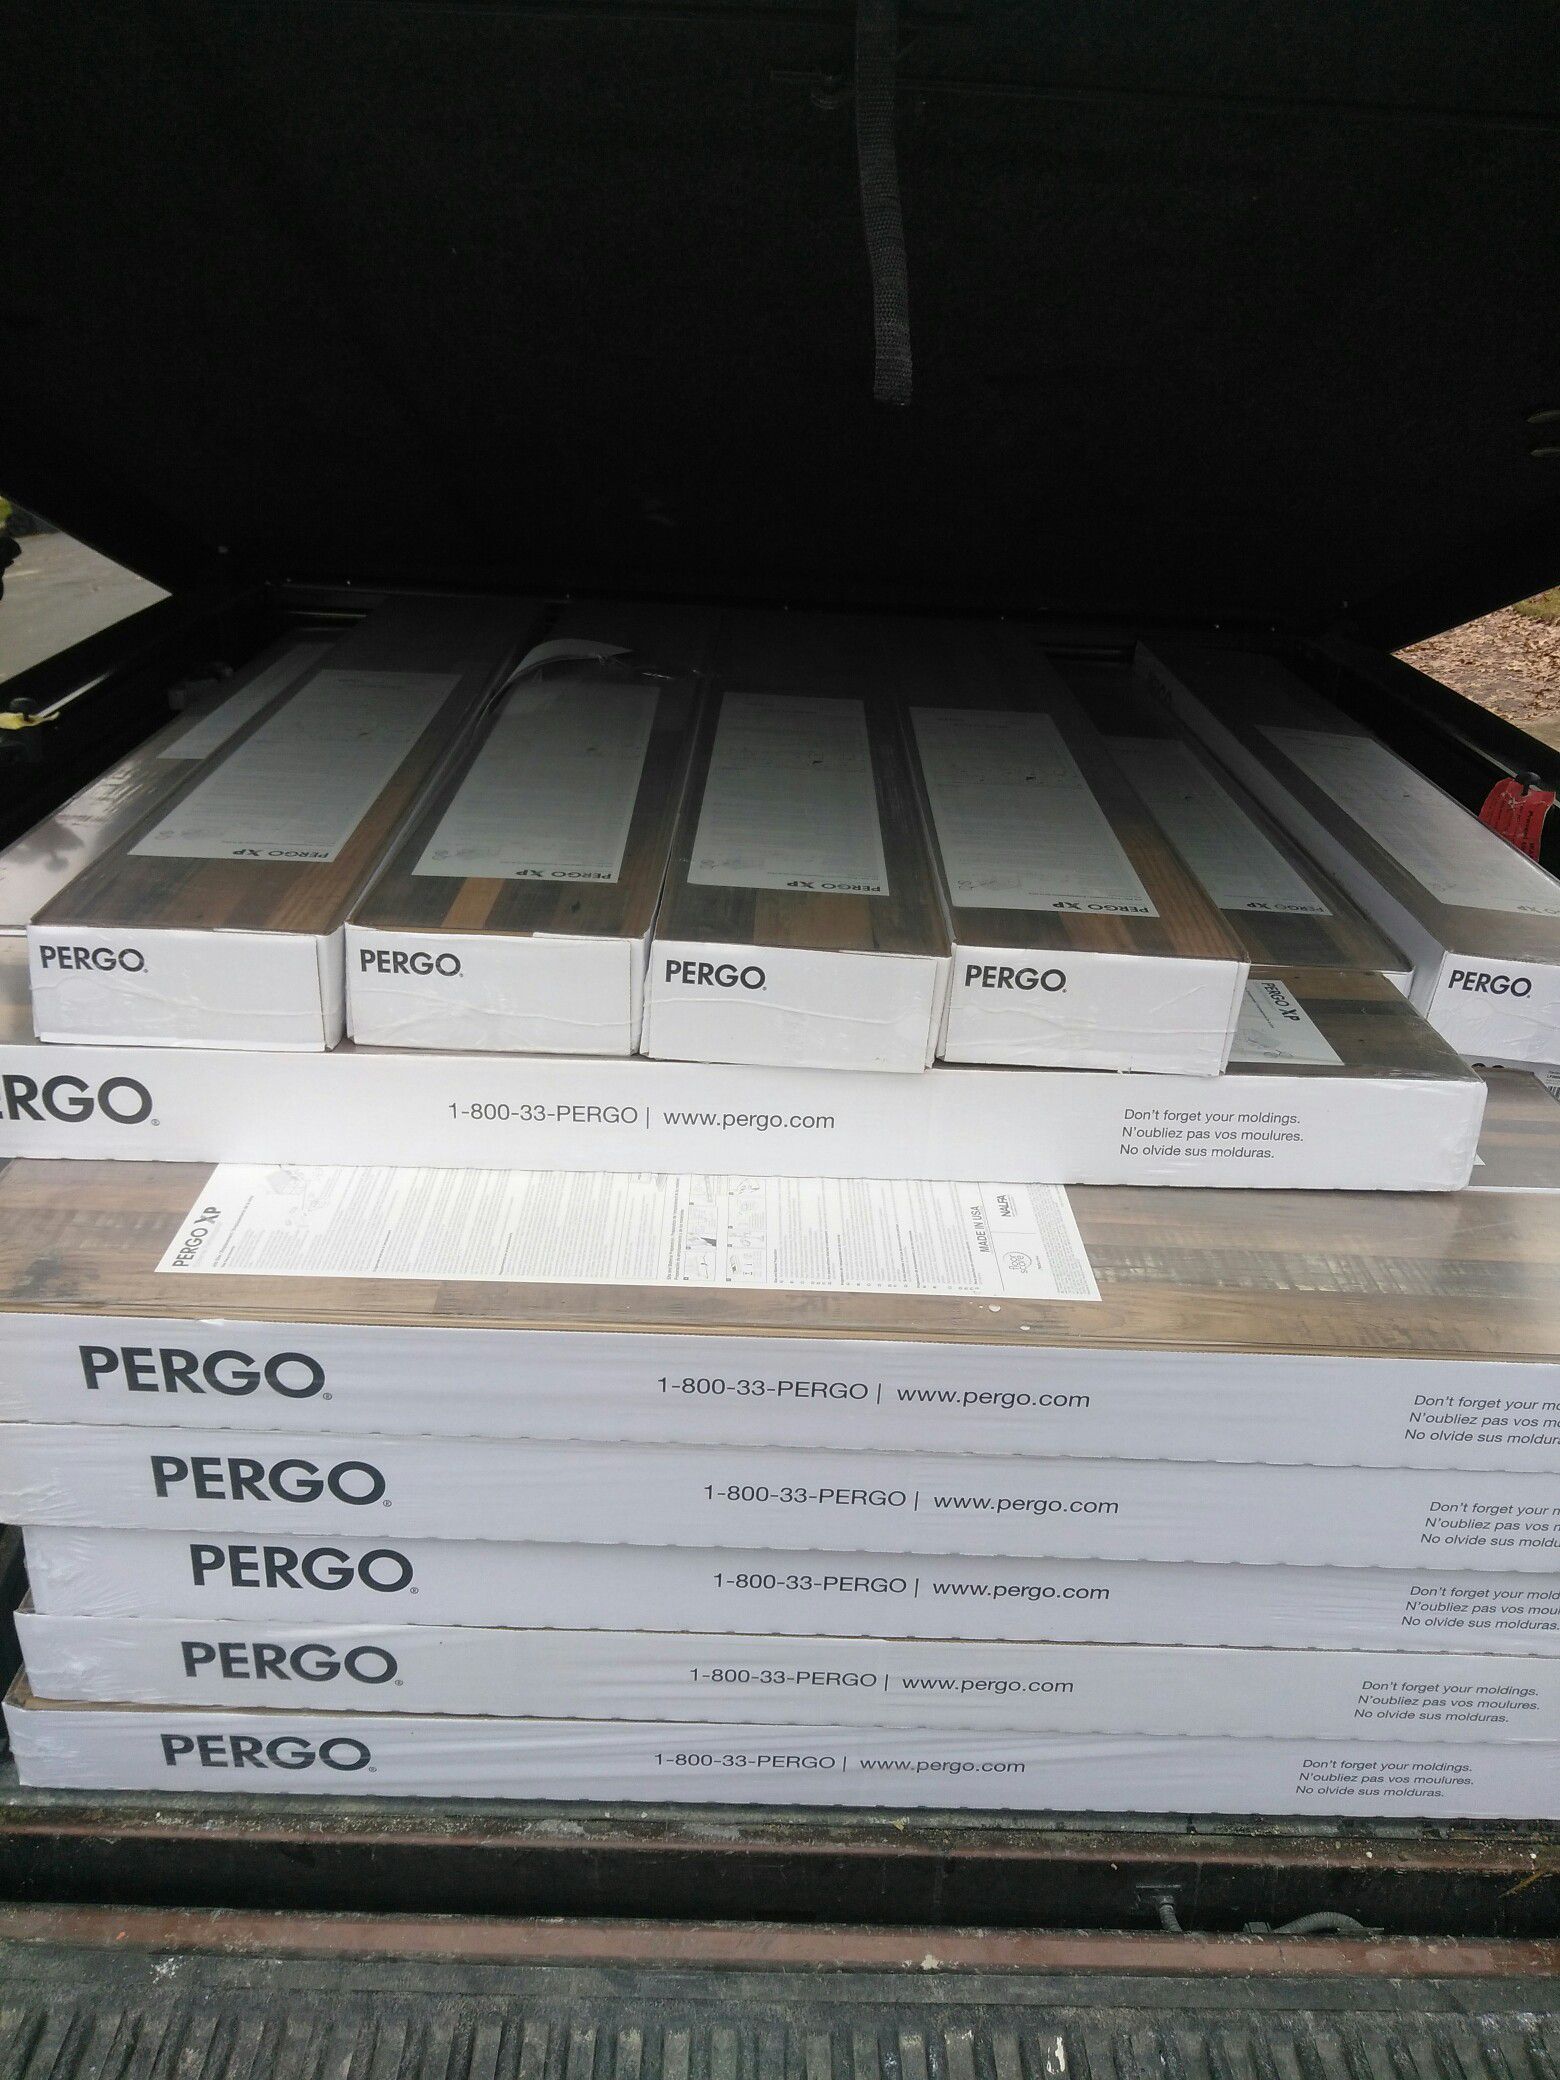 I have 50 boxes of pergo laminate flooring with padding total 1100 sq ft free delivery with 20 miles distance